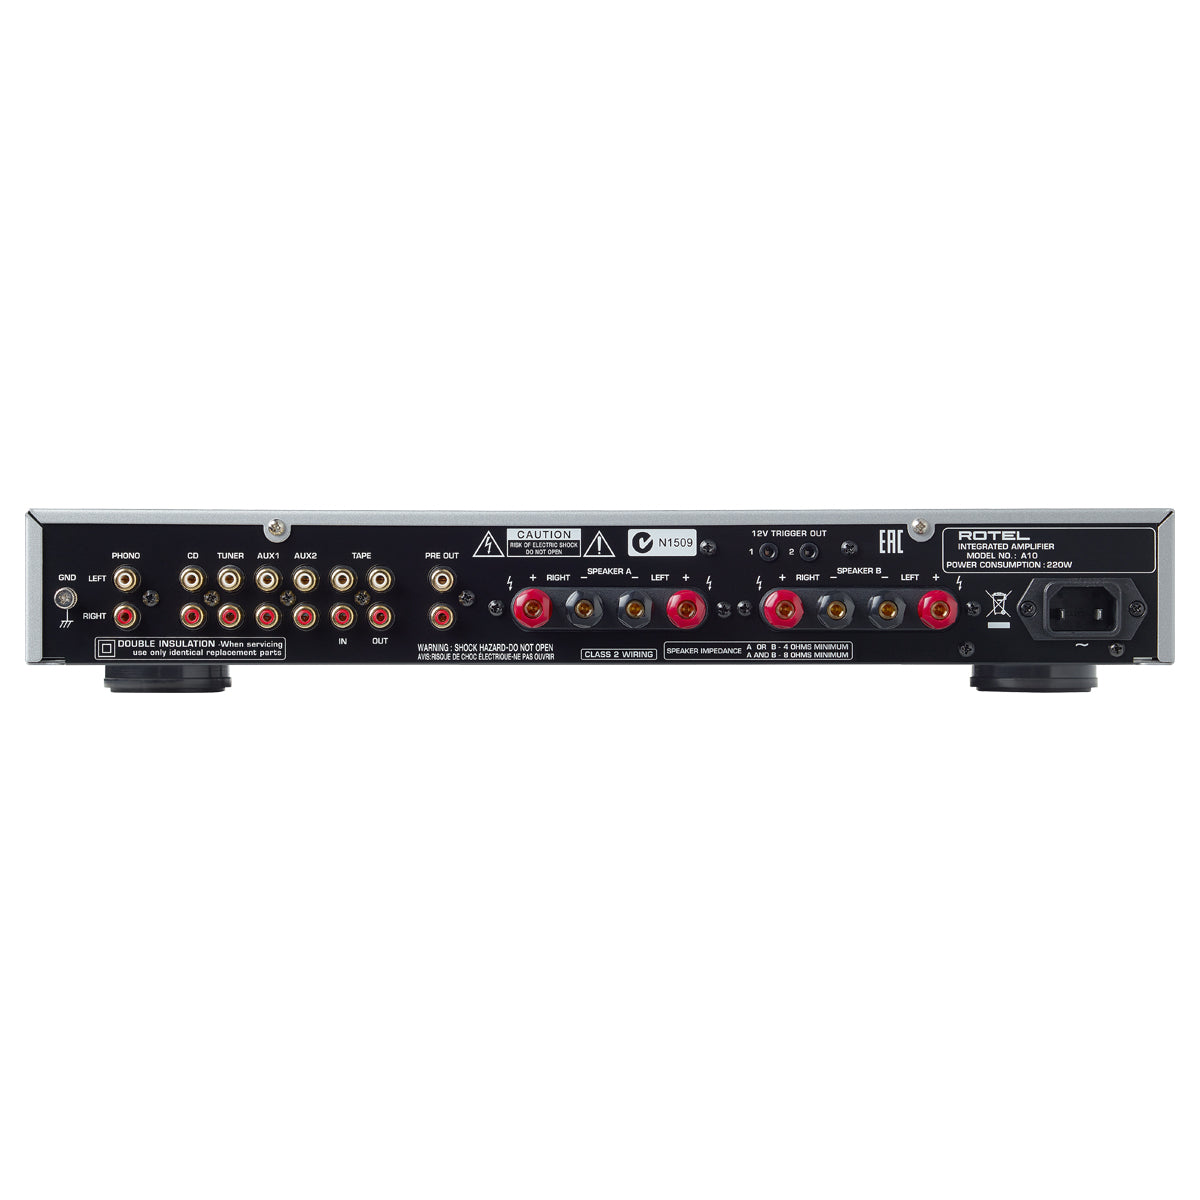 Rotel A10 Integrated Amplifier - Black - The Audio Experts